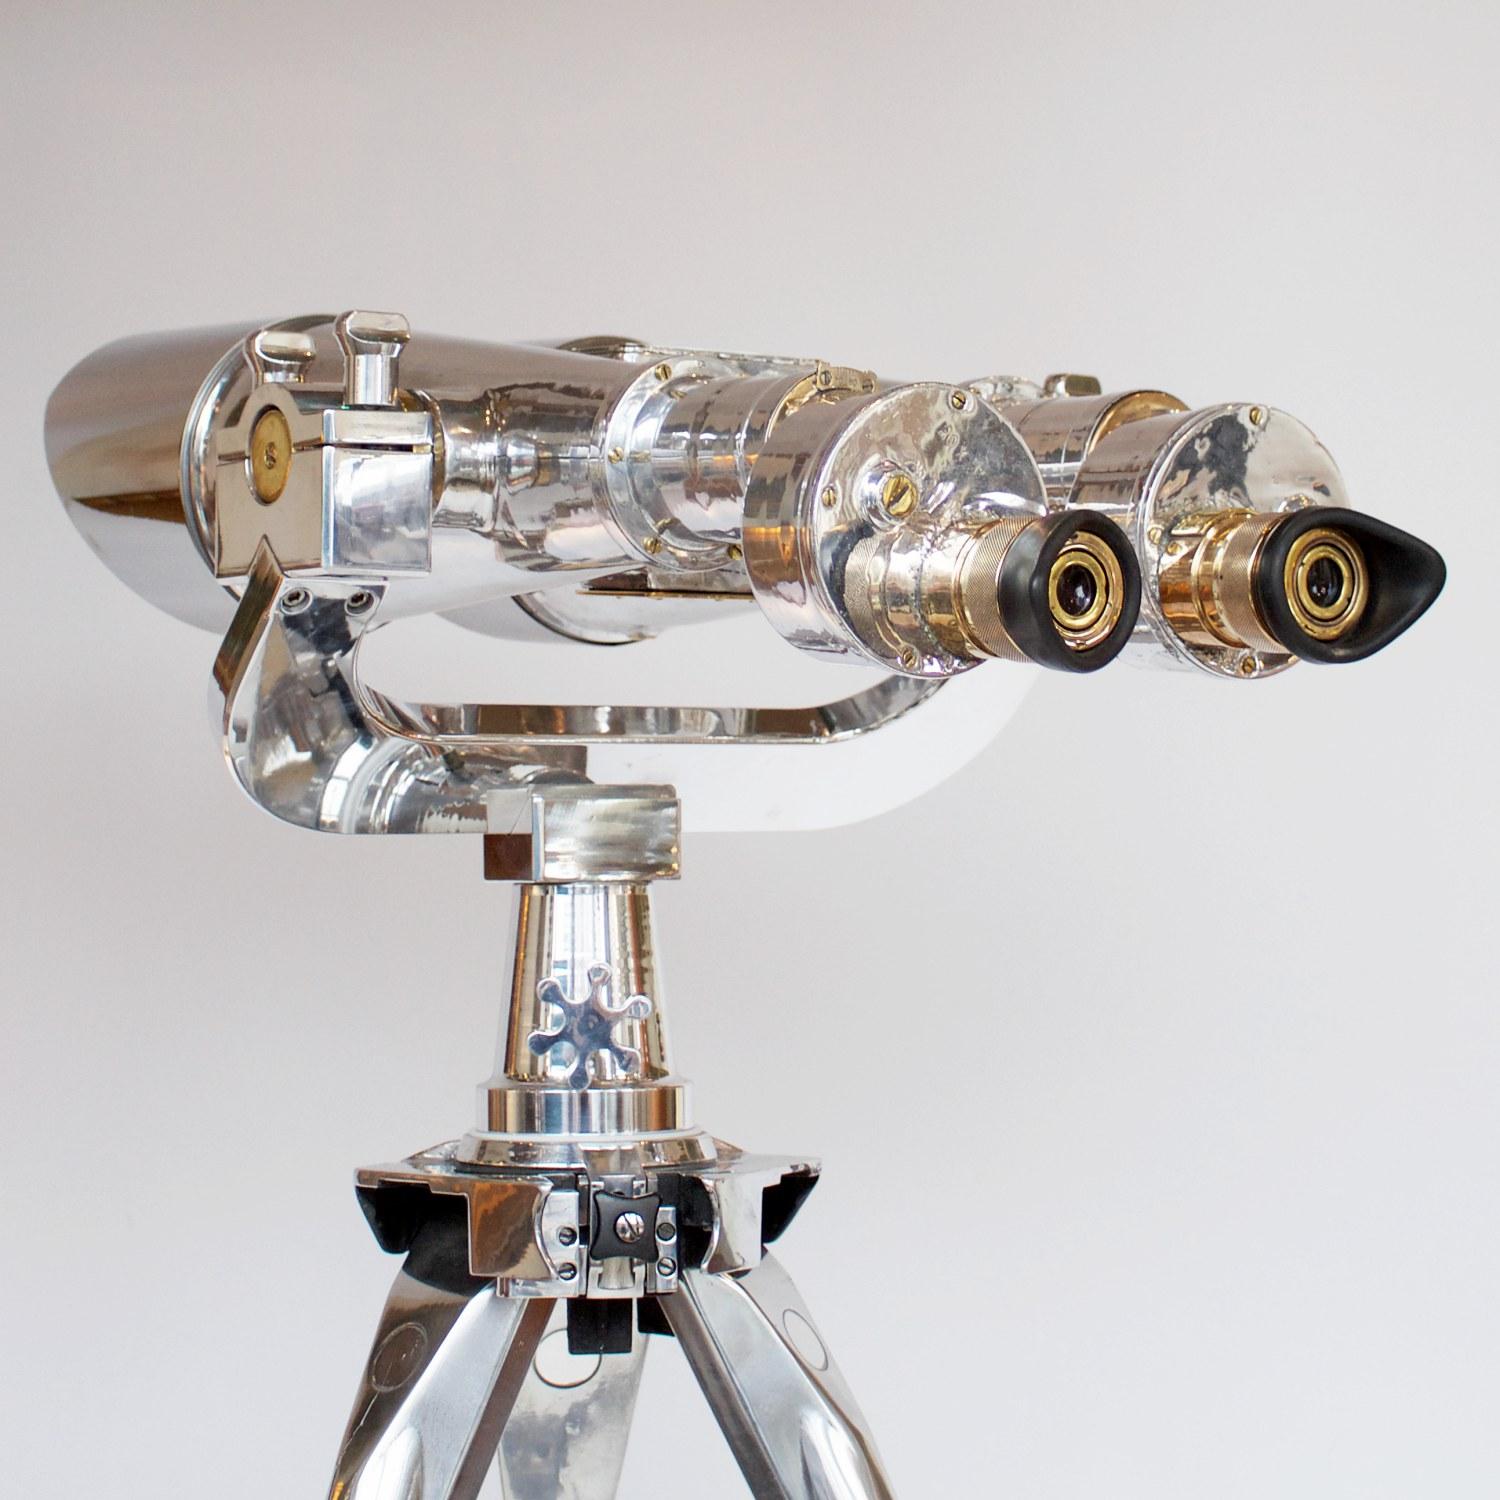 Pair of chromed metal and brass Nikon 20x120 WWII Naval Binoculars. Set on an original 1940s military, re-polished metal stand.

20x magnification with 120mm objective lenses. Paint stripped and metal polished. Optics fully